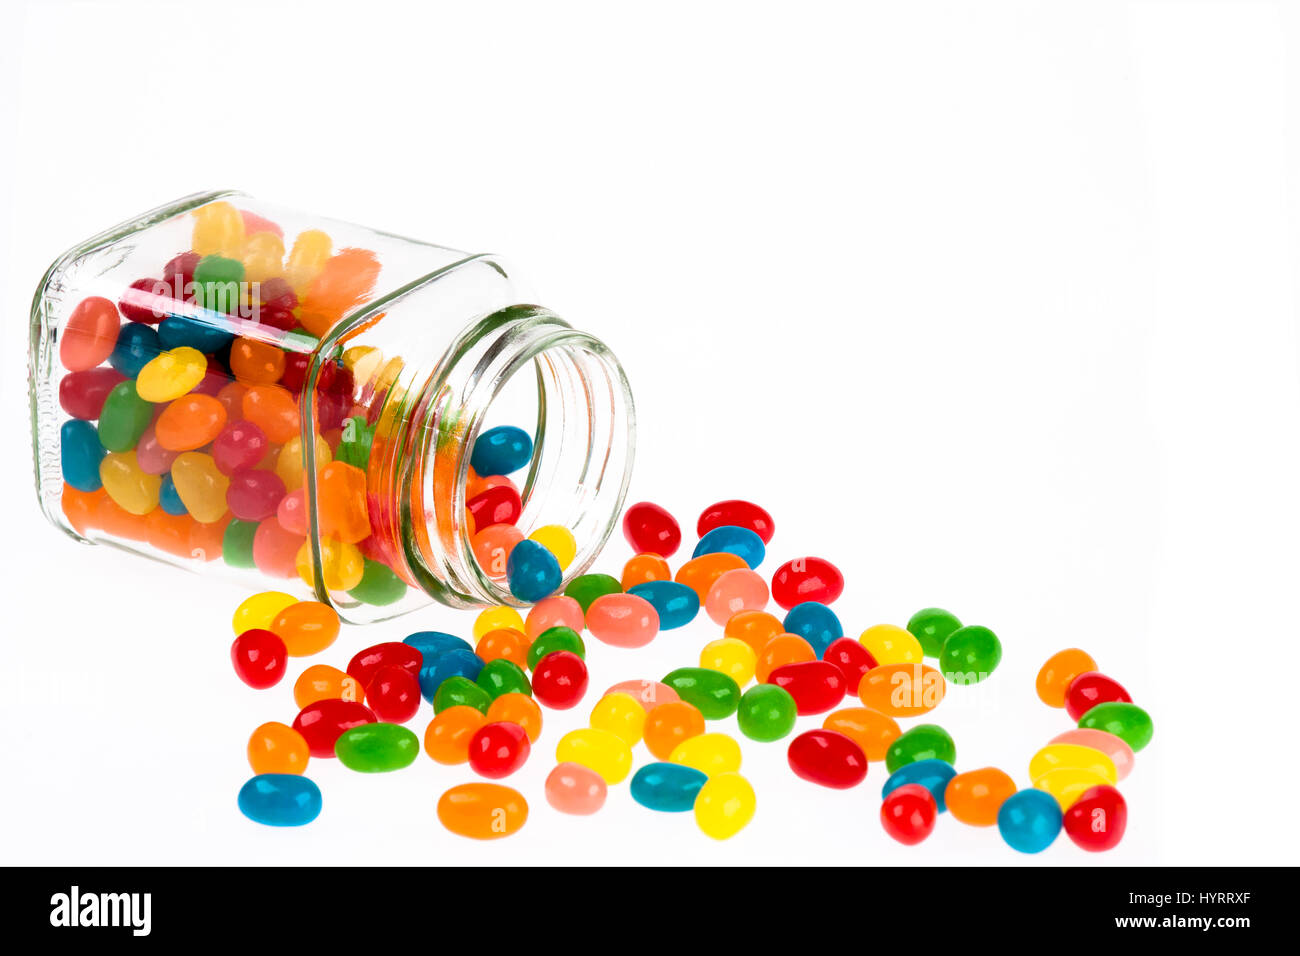 Close up of a delicious Jelly Beans candy spilled from a glass jar ...